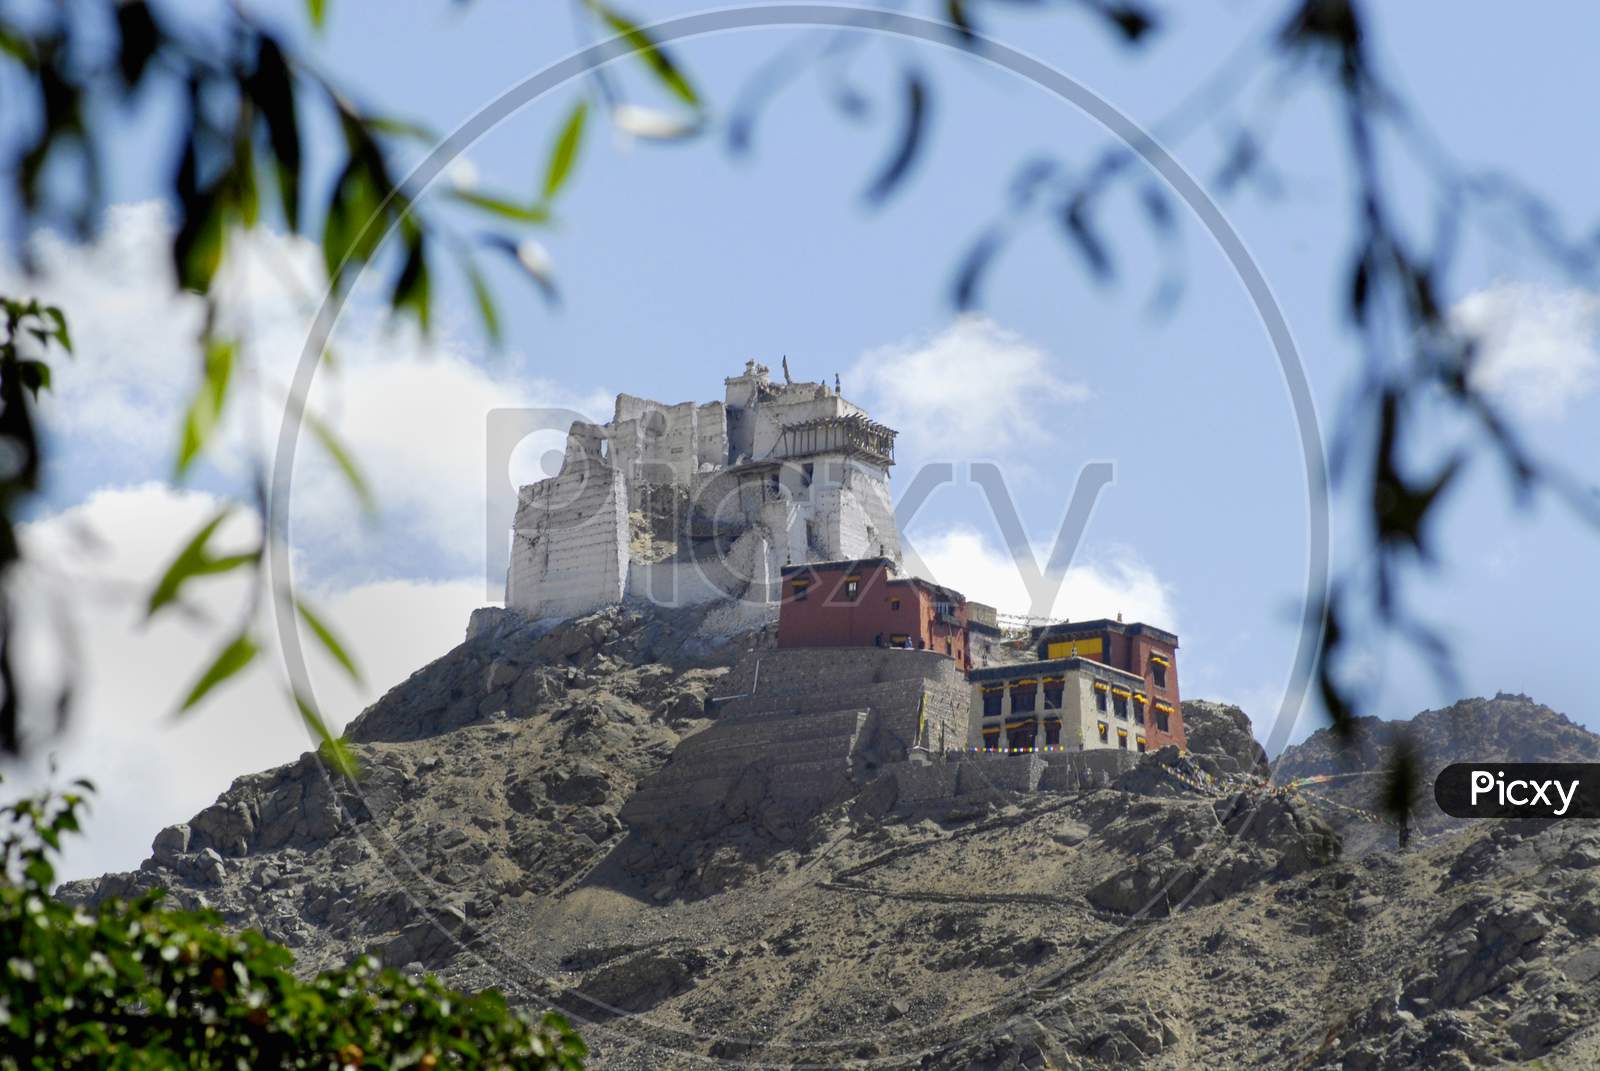 A View of Buddhist Monasteries on The Mountains of Ladakh